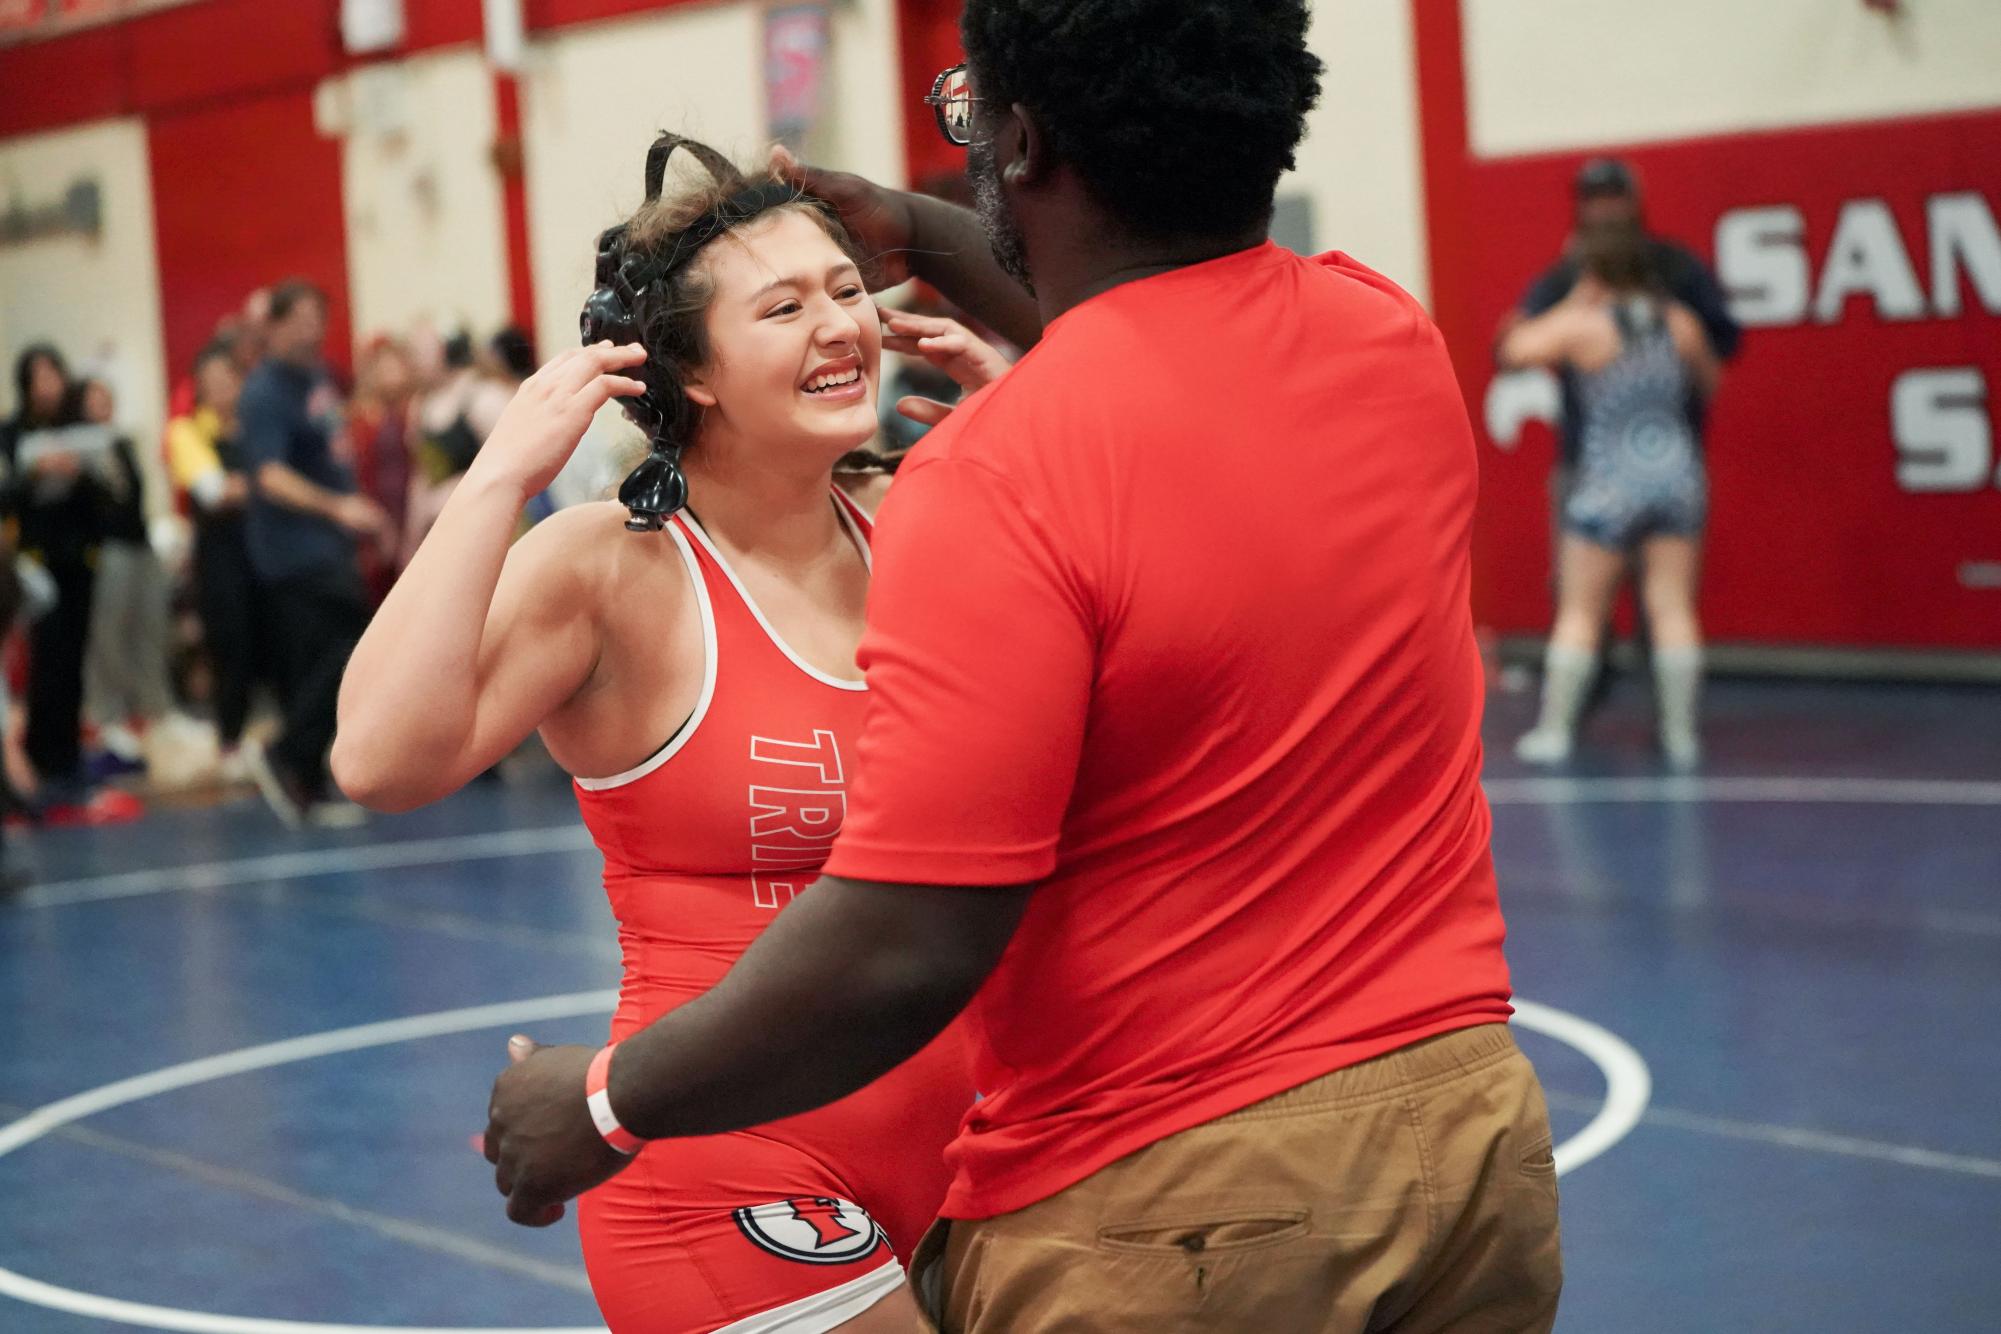 Levi Burrell and her wrestling coach, Jayson Baxter, celebrates her win from a match in CIF.